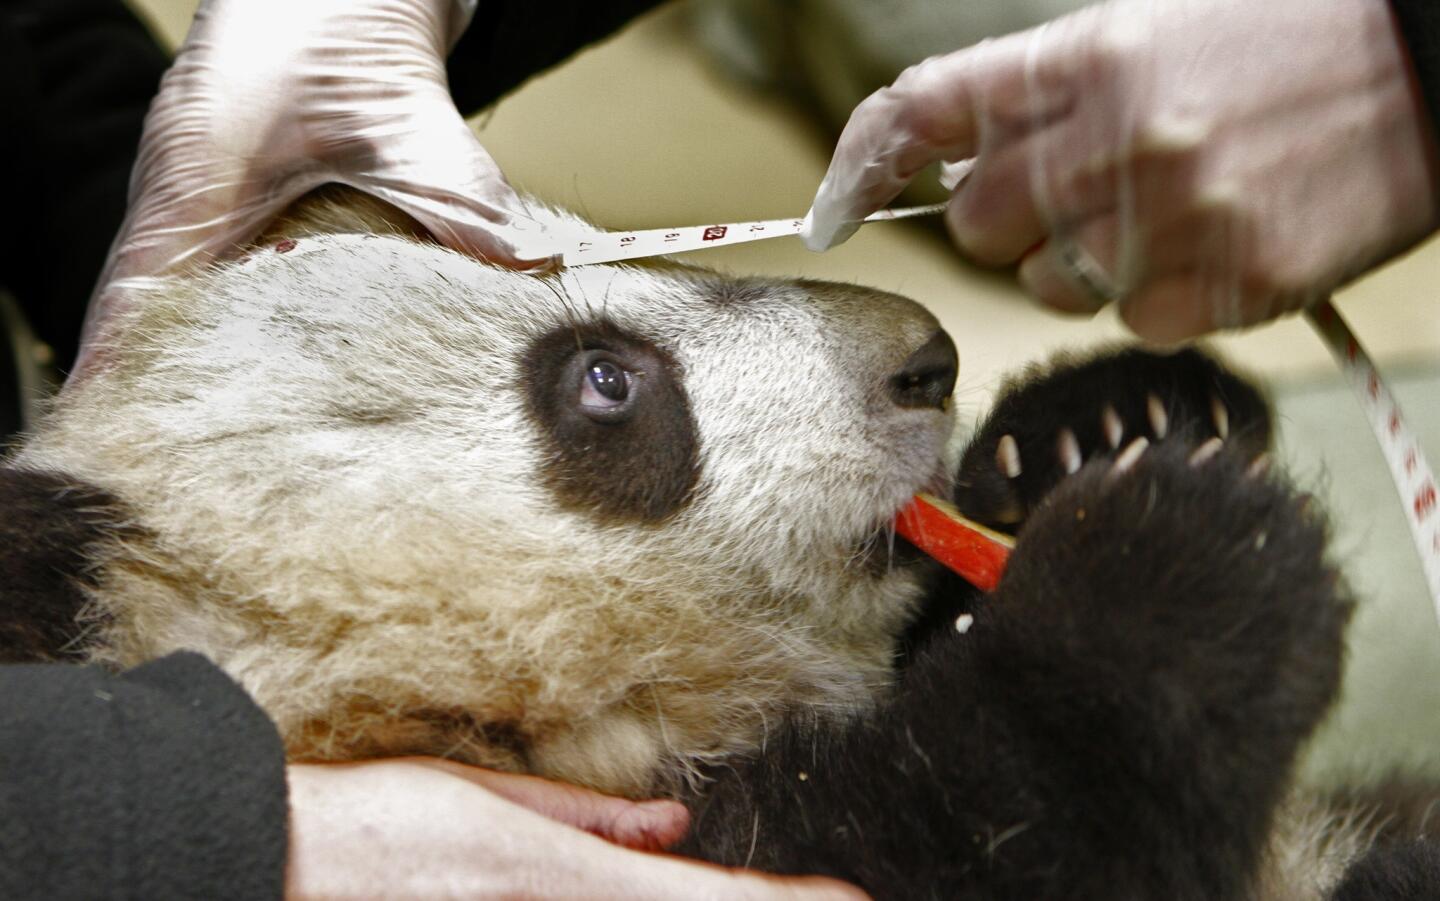 Xiao Liwu tries to munch on a piece of apple as his head is measured during a weekly checkup at the San Diego Zoo.